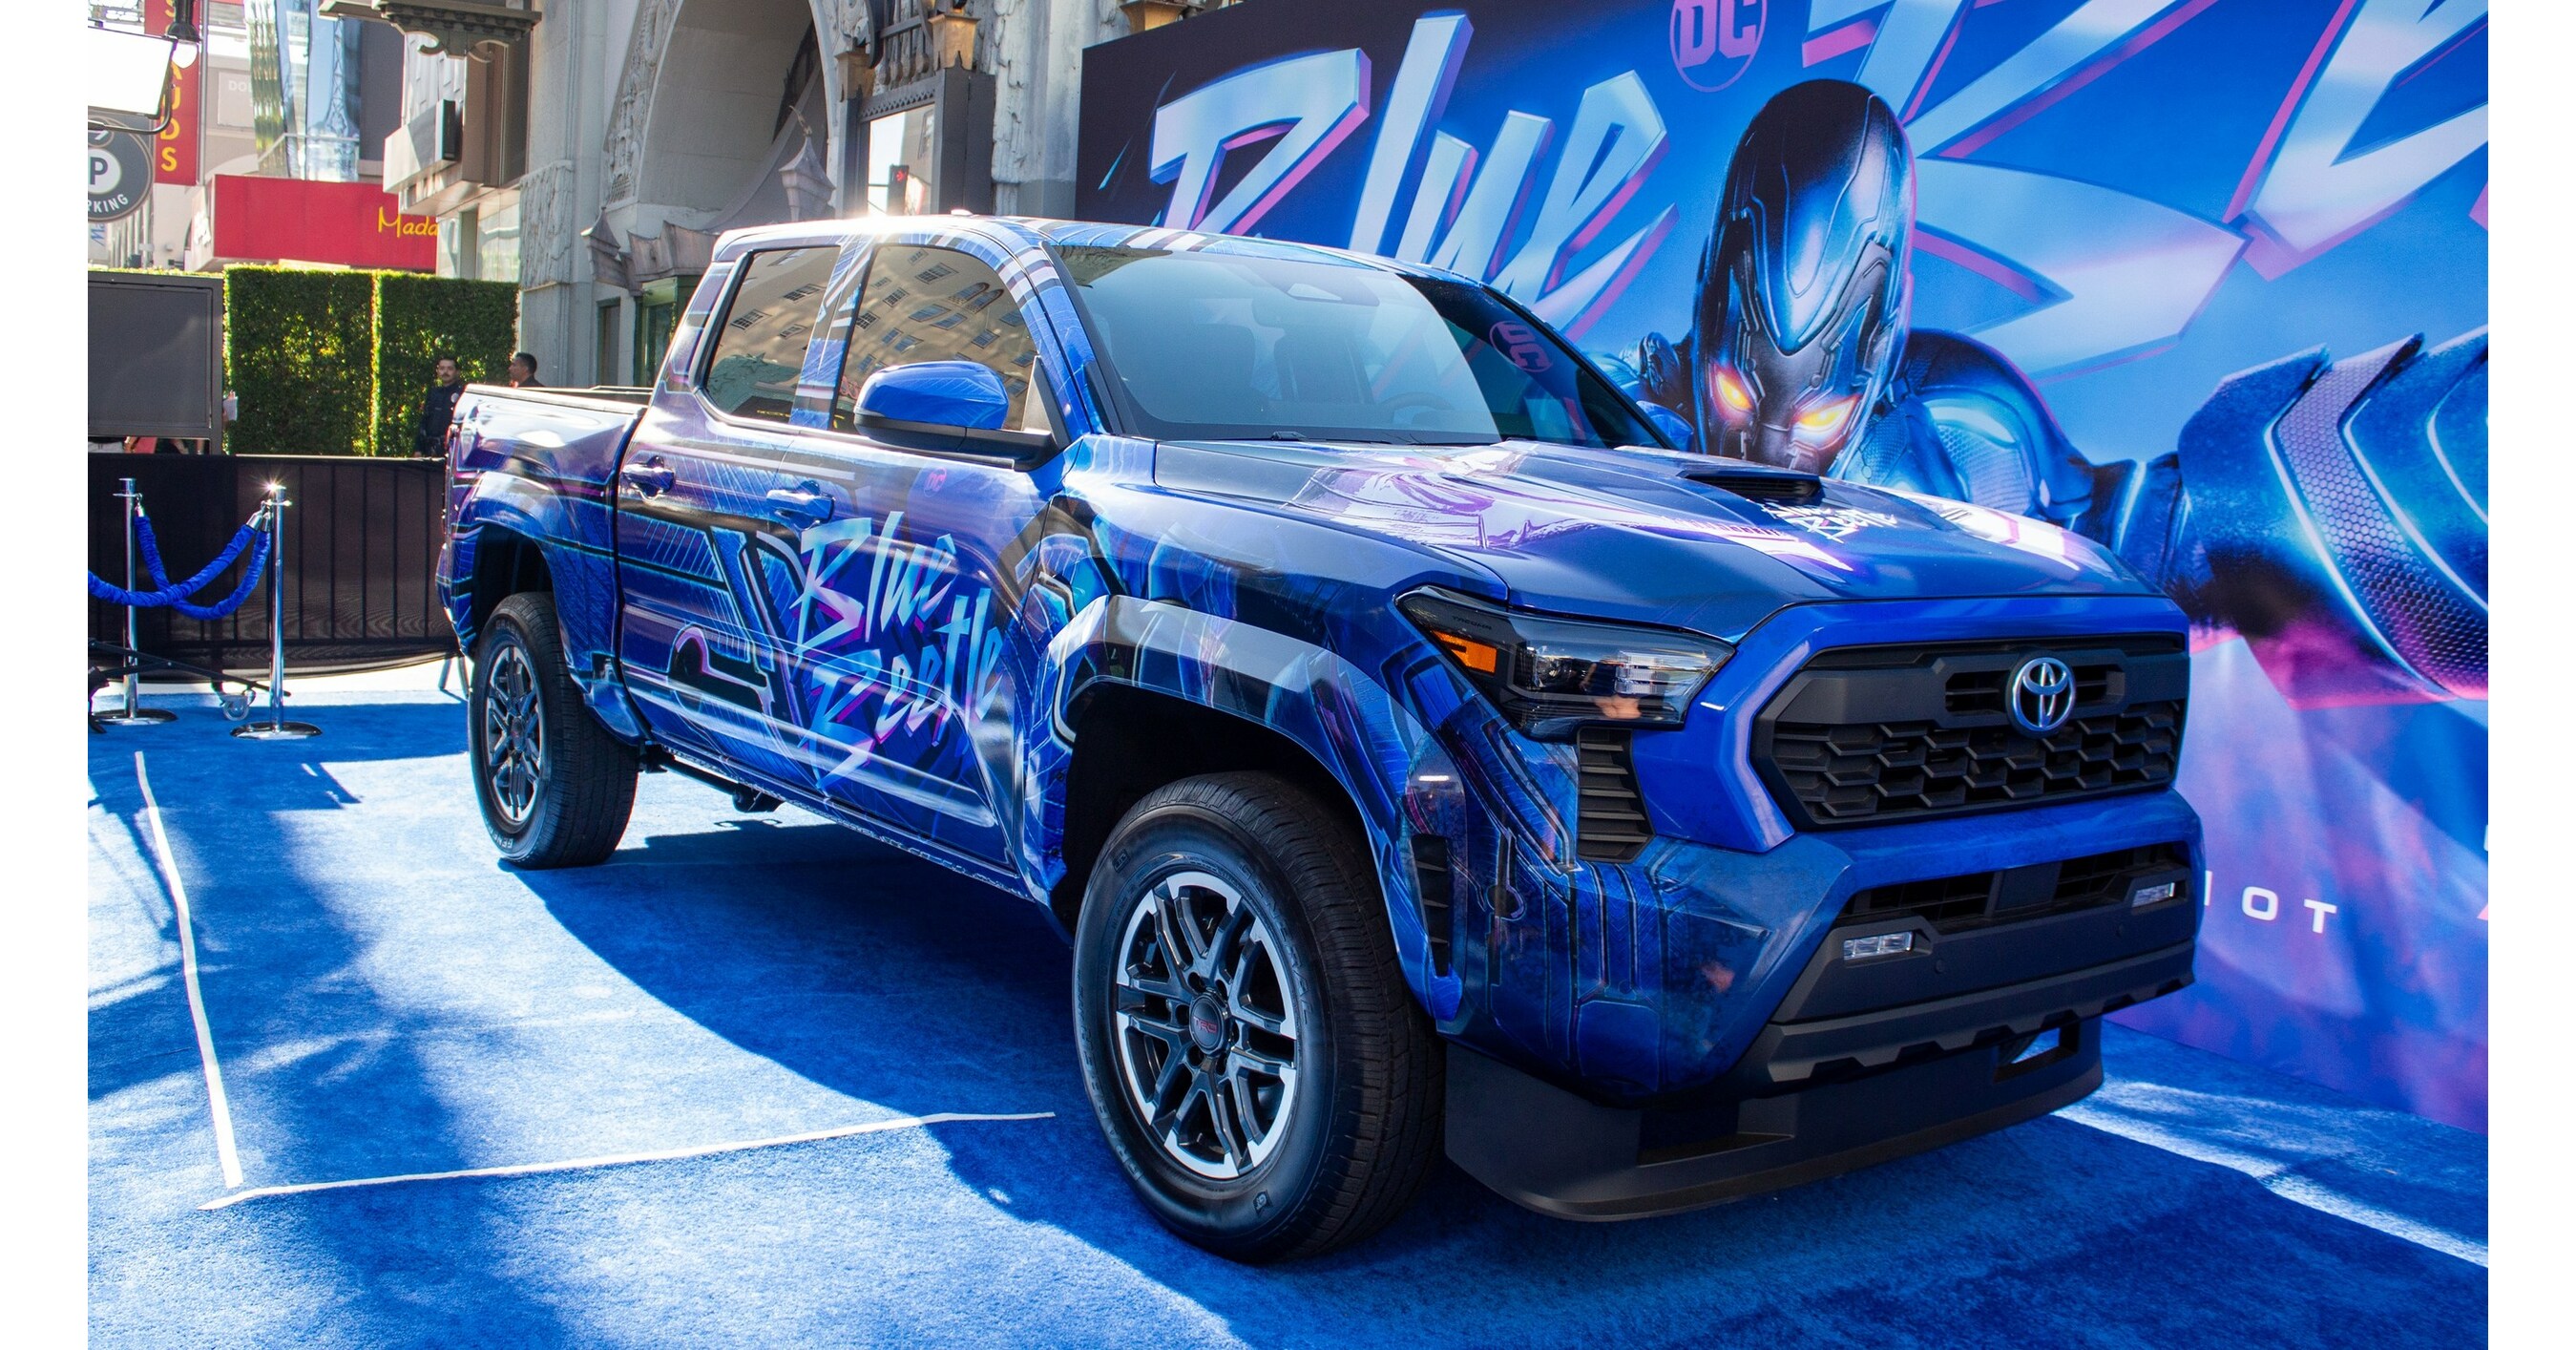 The AllNew 2024 Toyota Makes Big Screen Debut in "Blue Beetle"